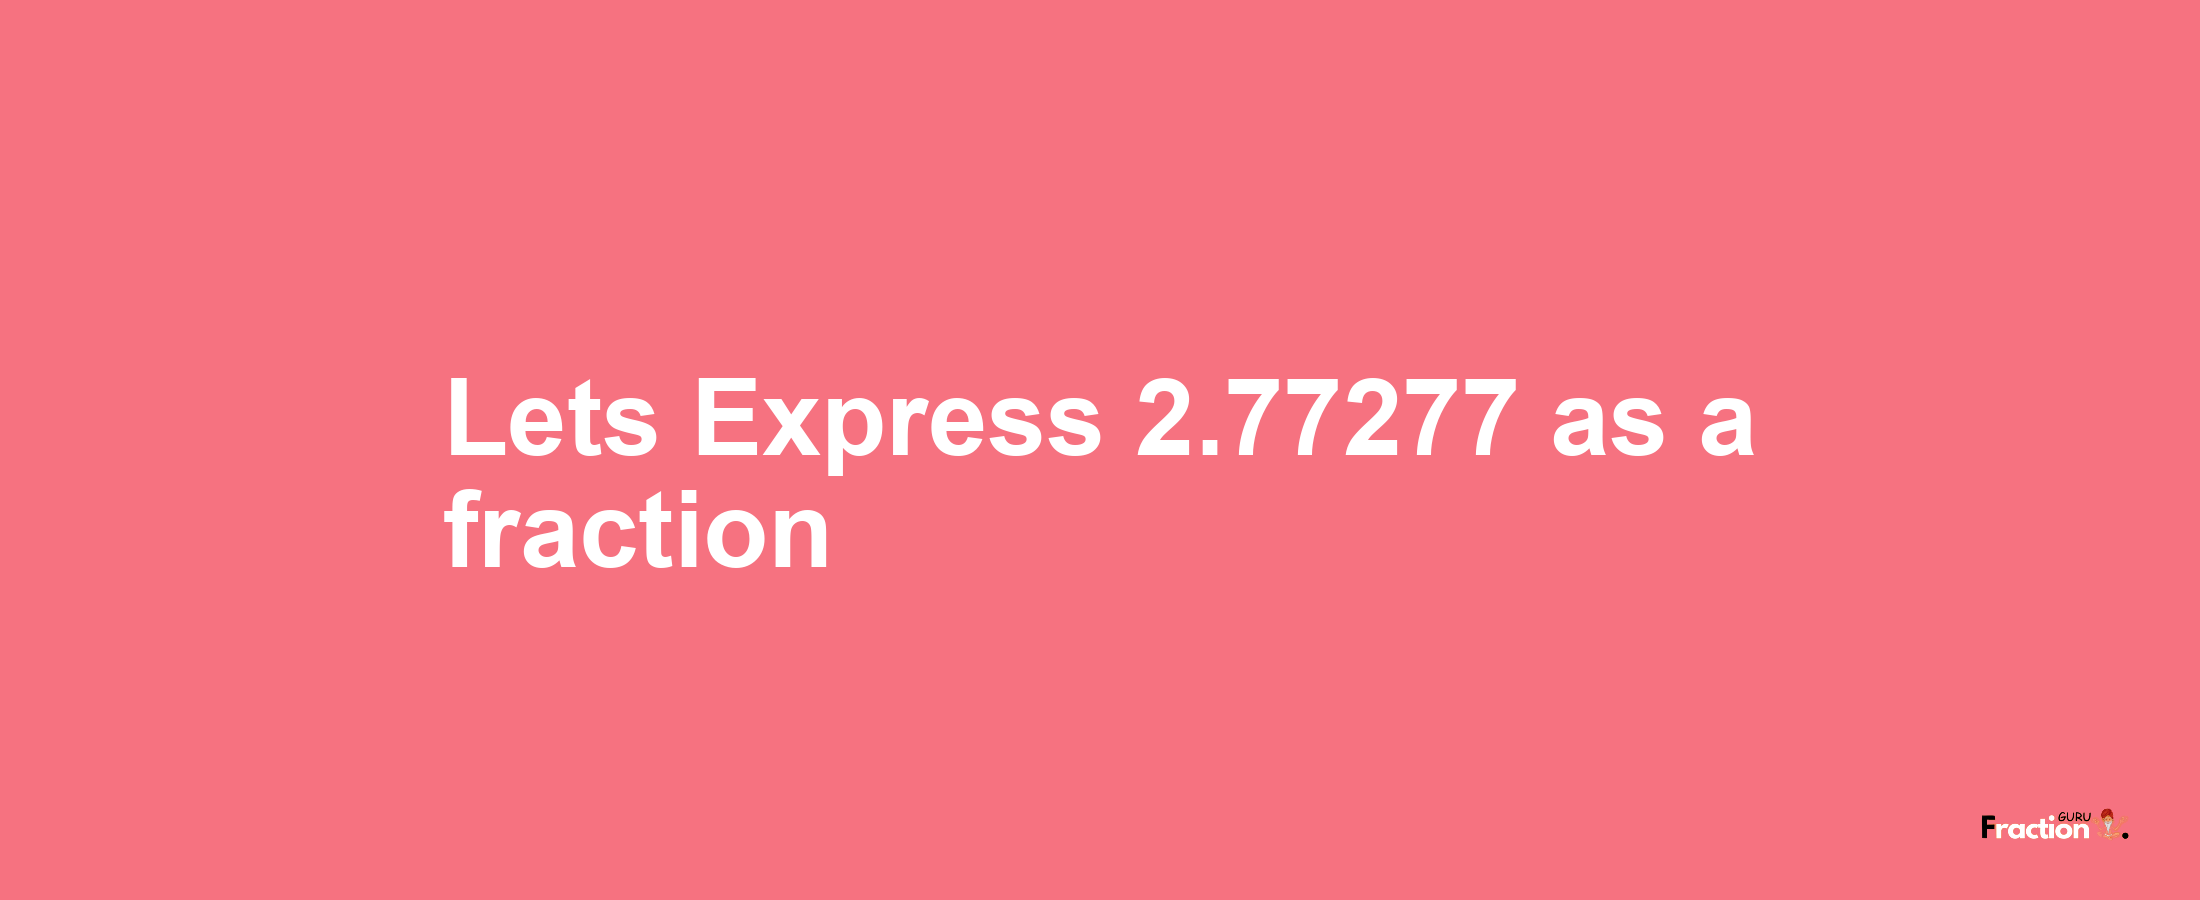 Lets Express 2.77277 as afraction